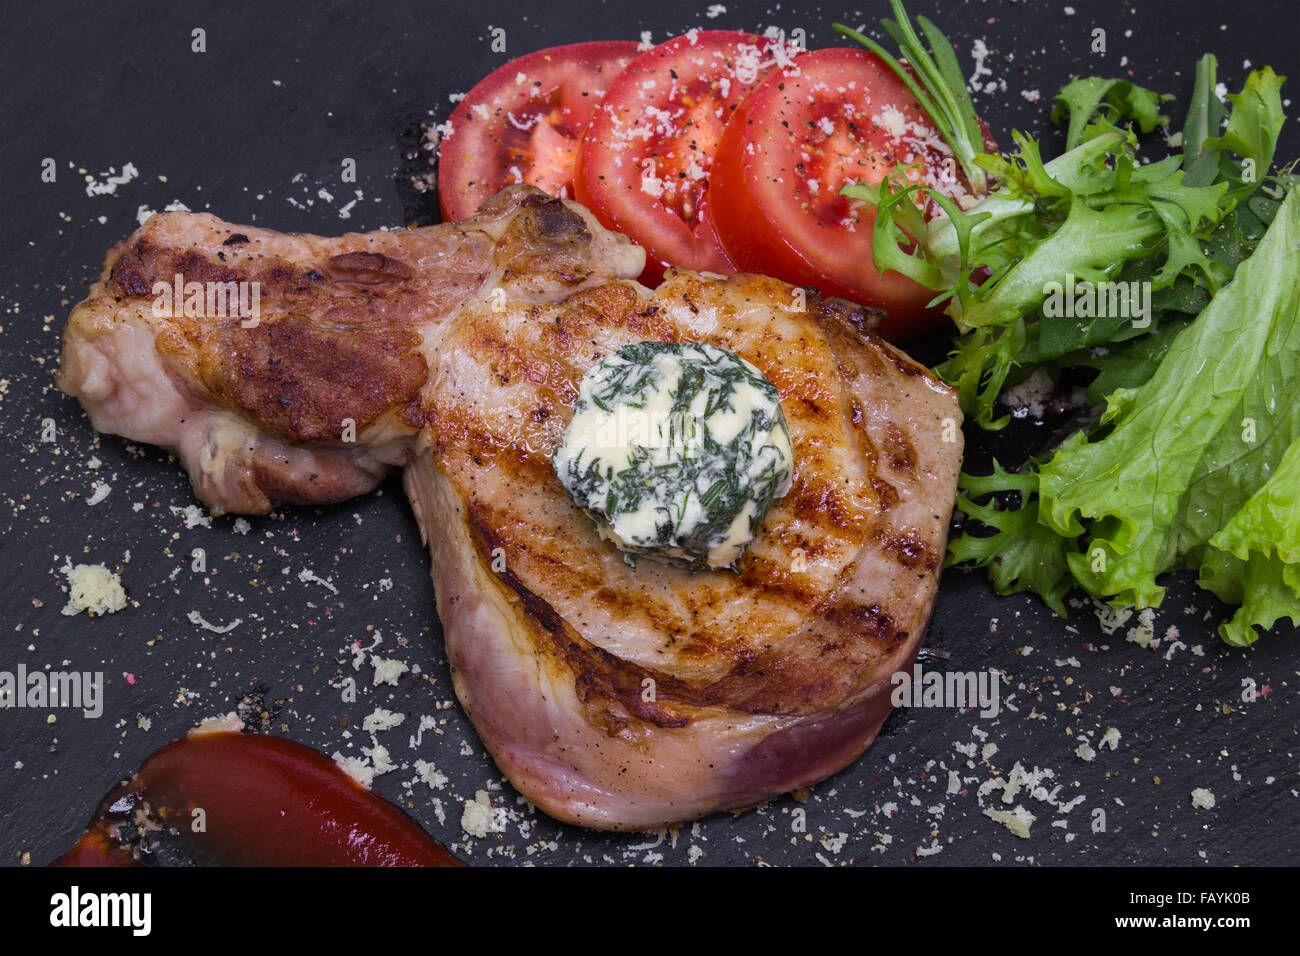 Grilled pork chop with vegetables and tomato sauce Stock Photo